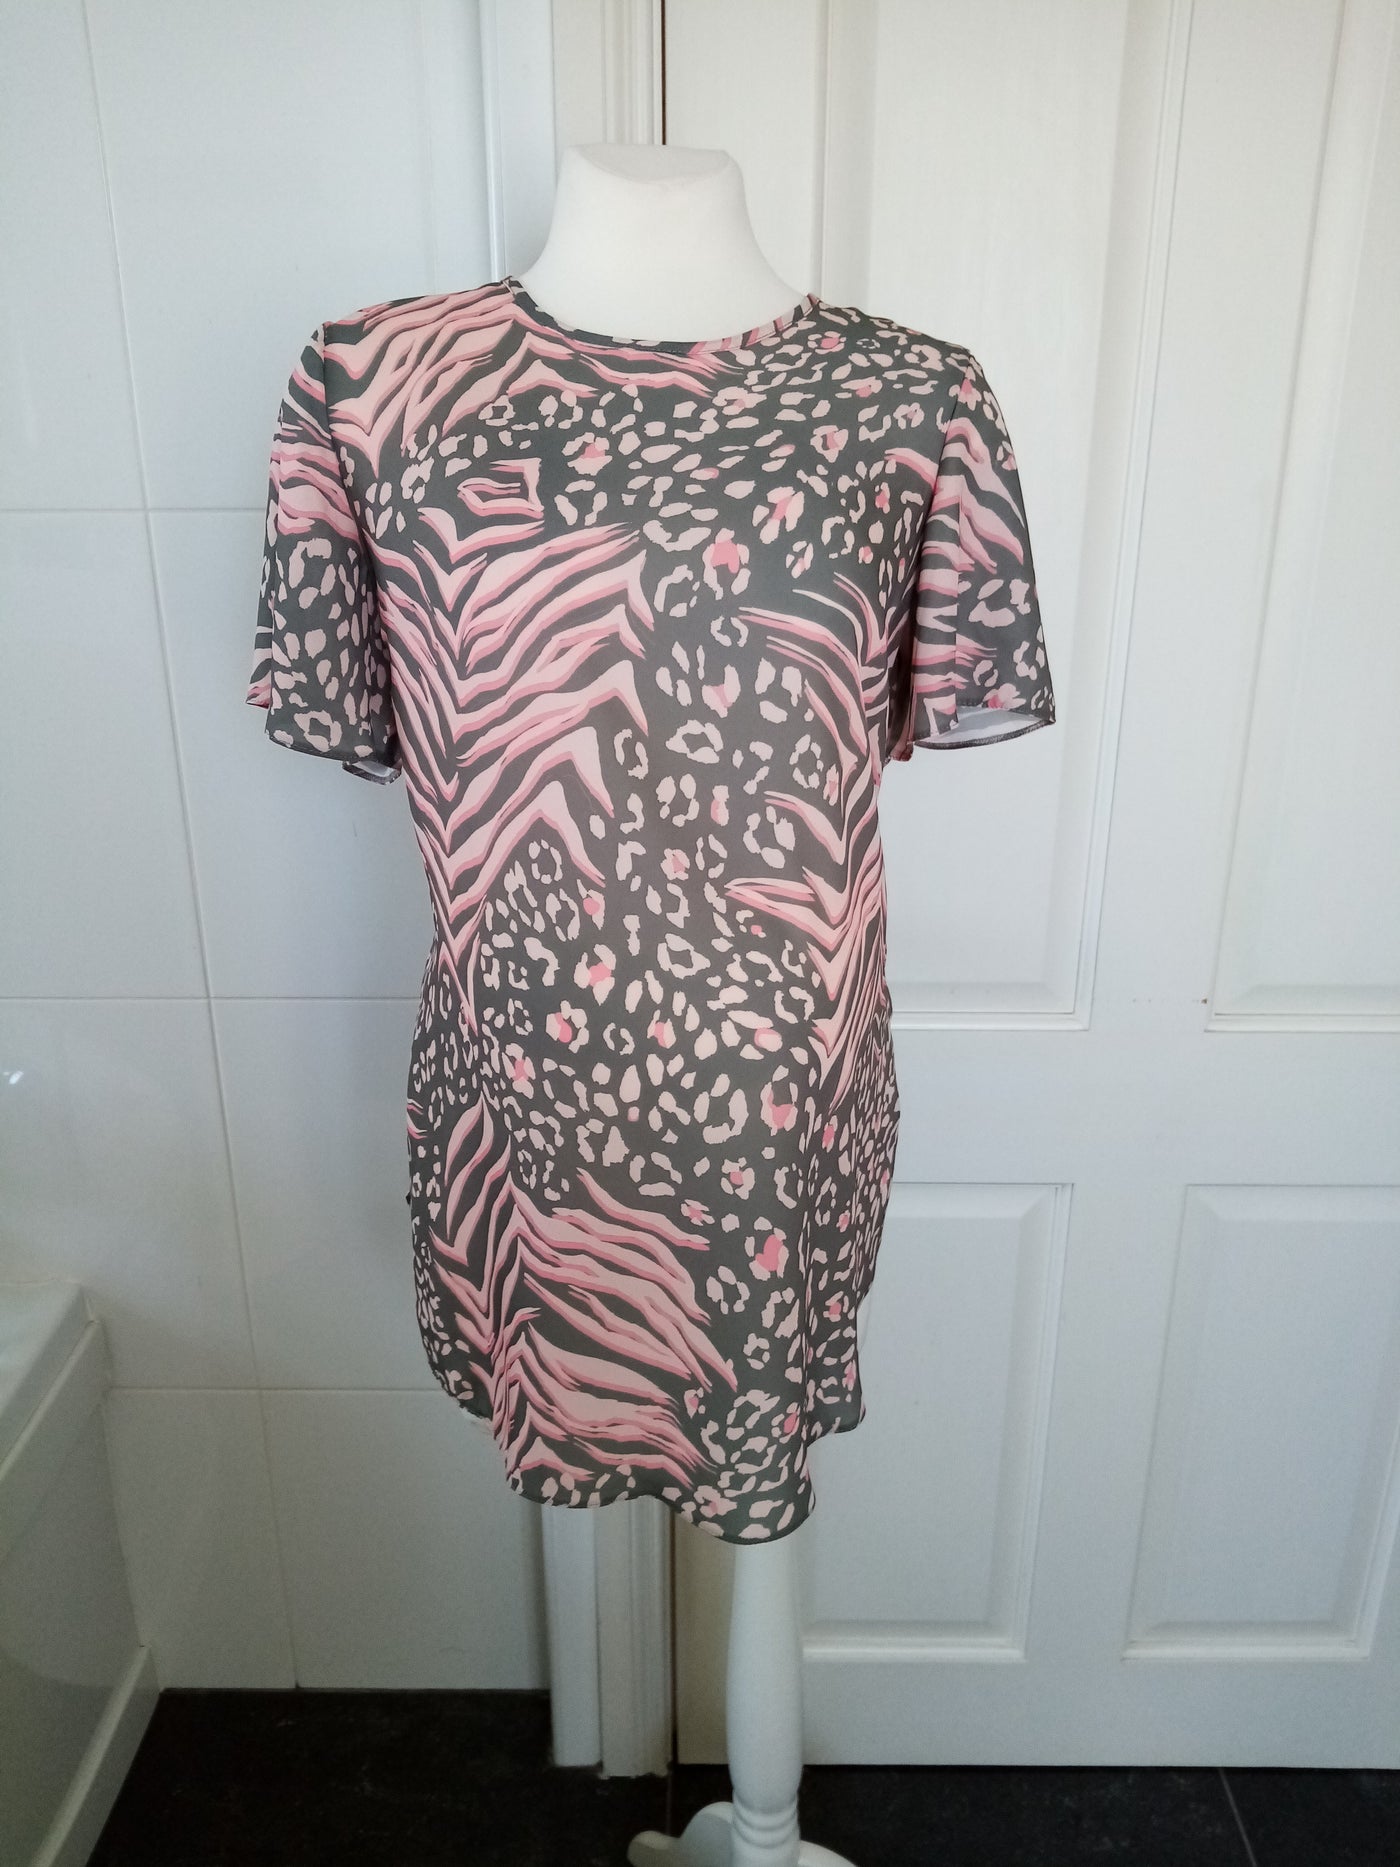 New Look Maternity Grey/Pink Patterned Top - Size 12